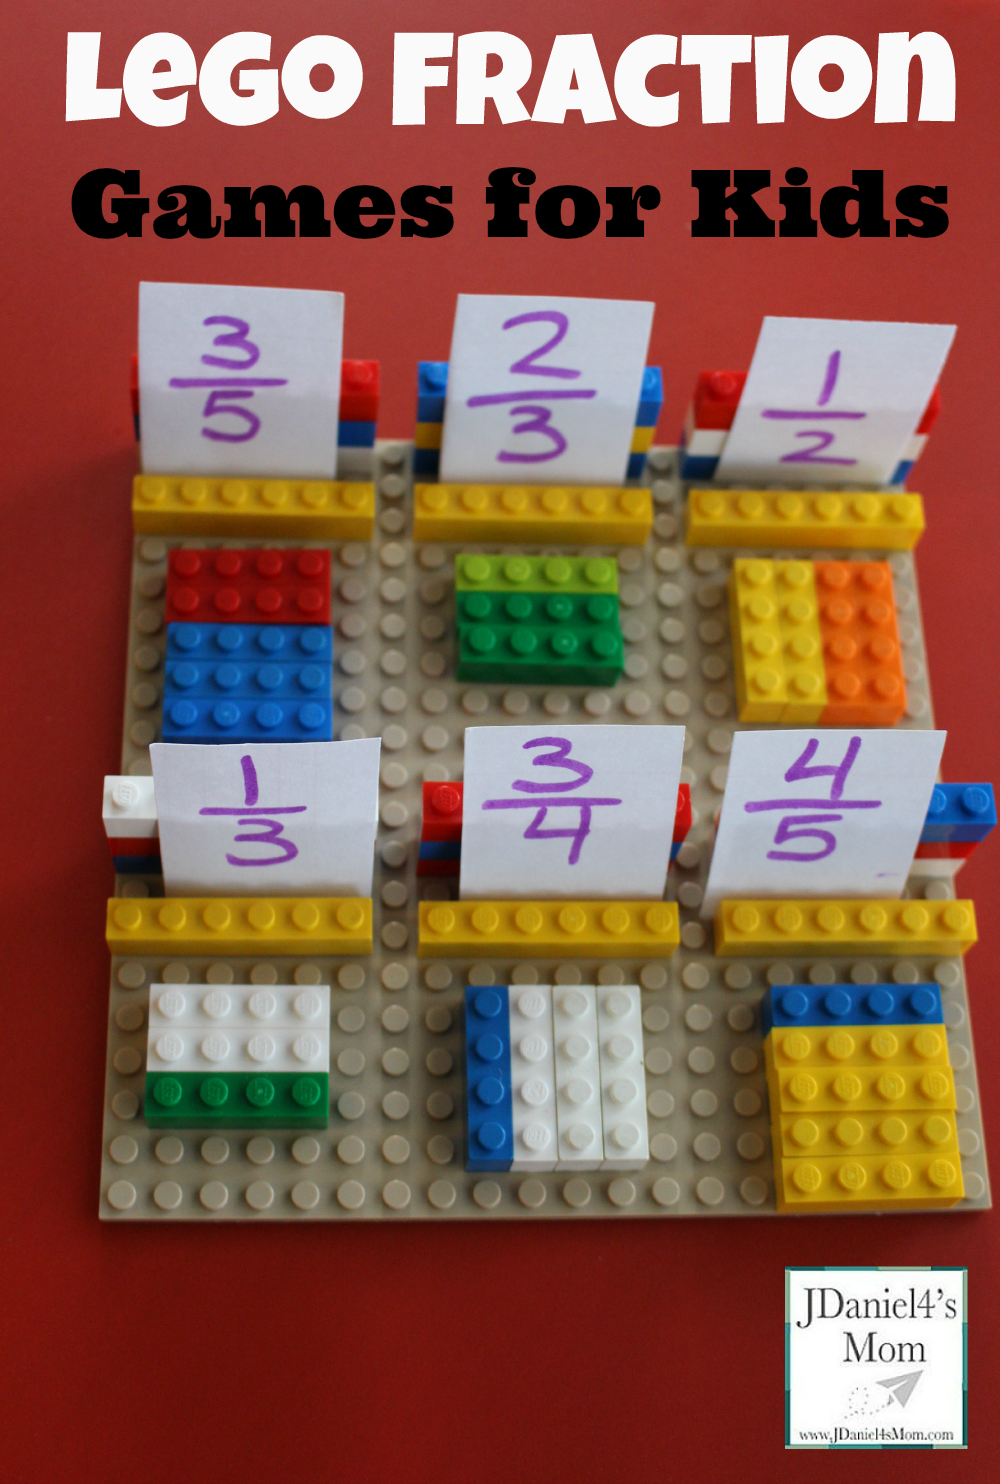 Lego-Fraction-Games-for-Kids-Learning-Activity.png